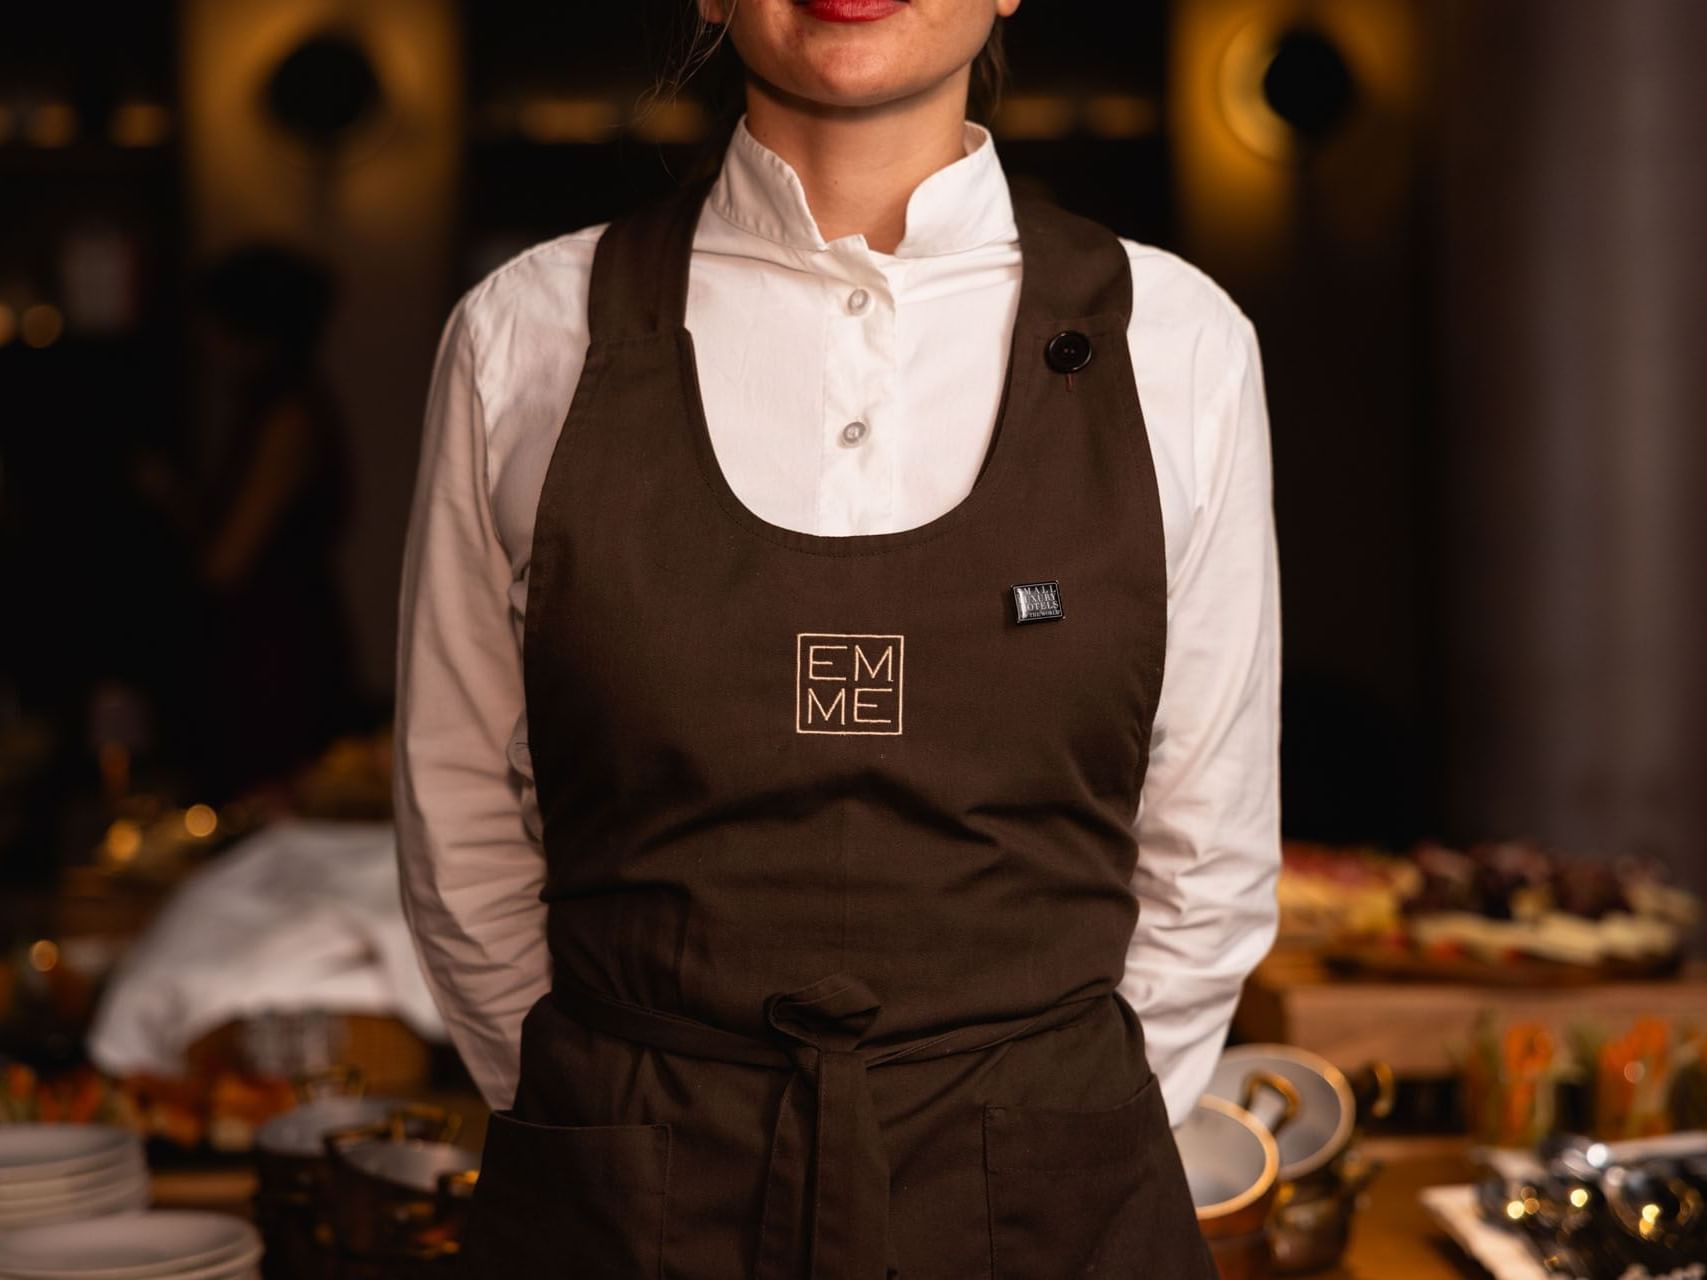 A chef in a brown apron posing to the camera at EMME Restaurant